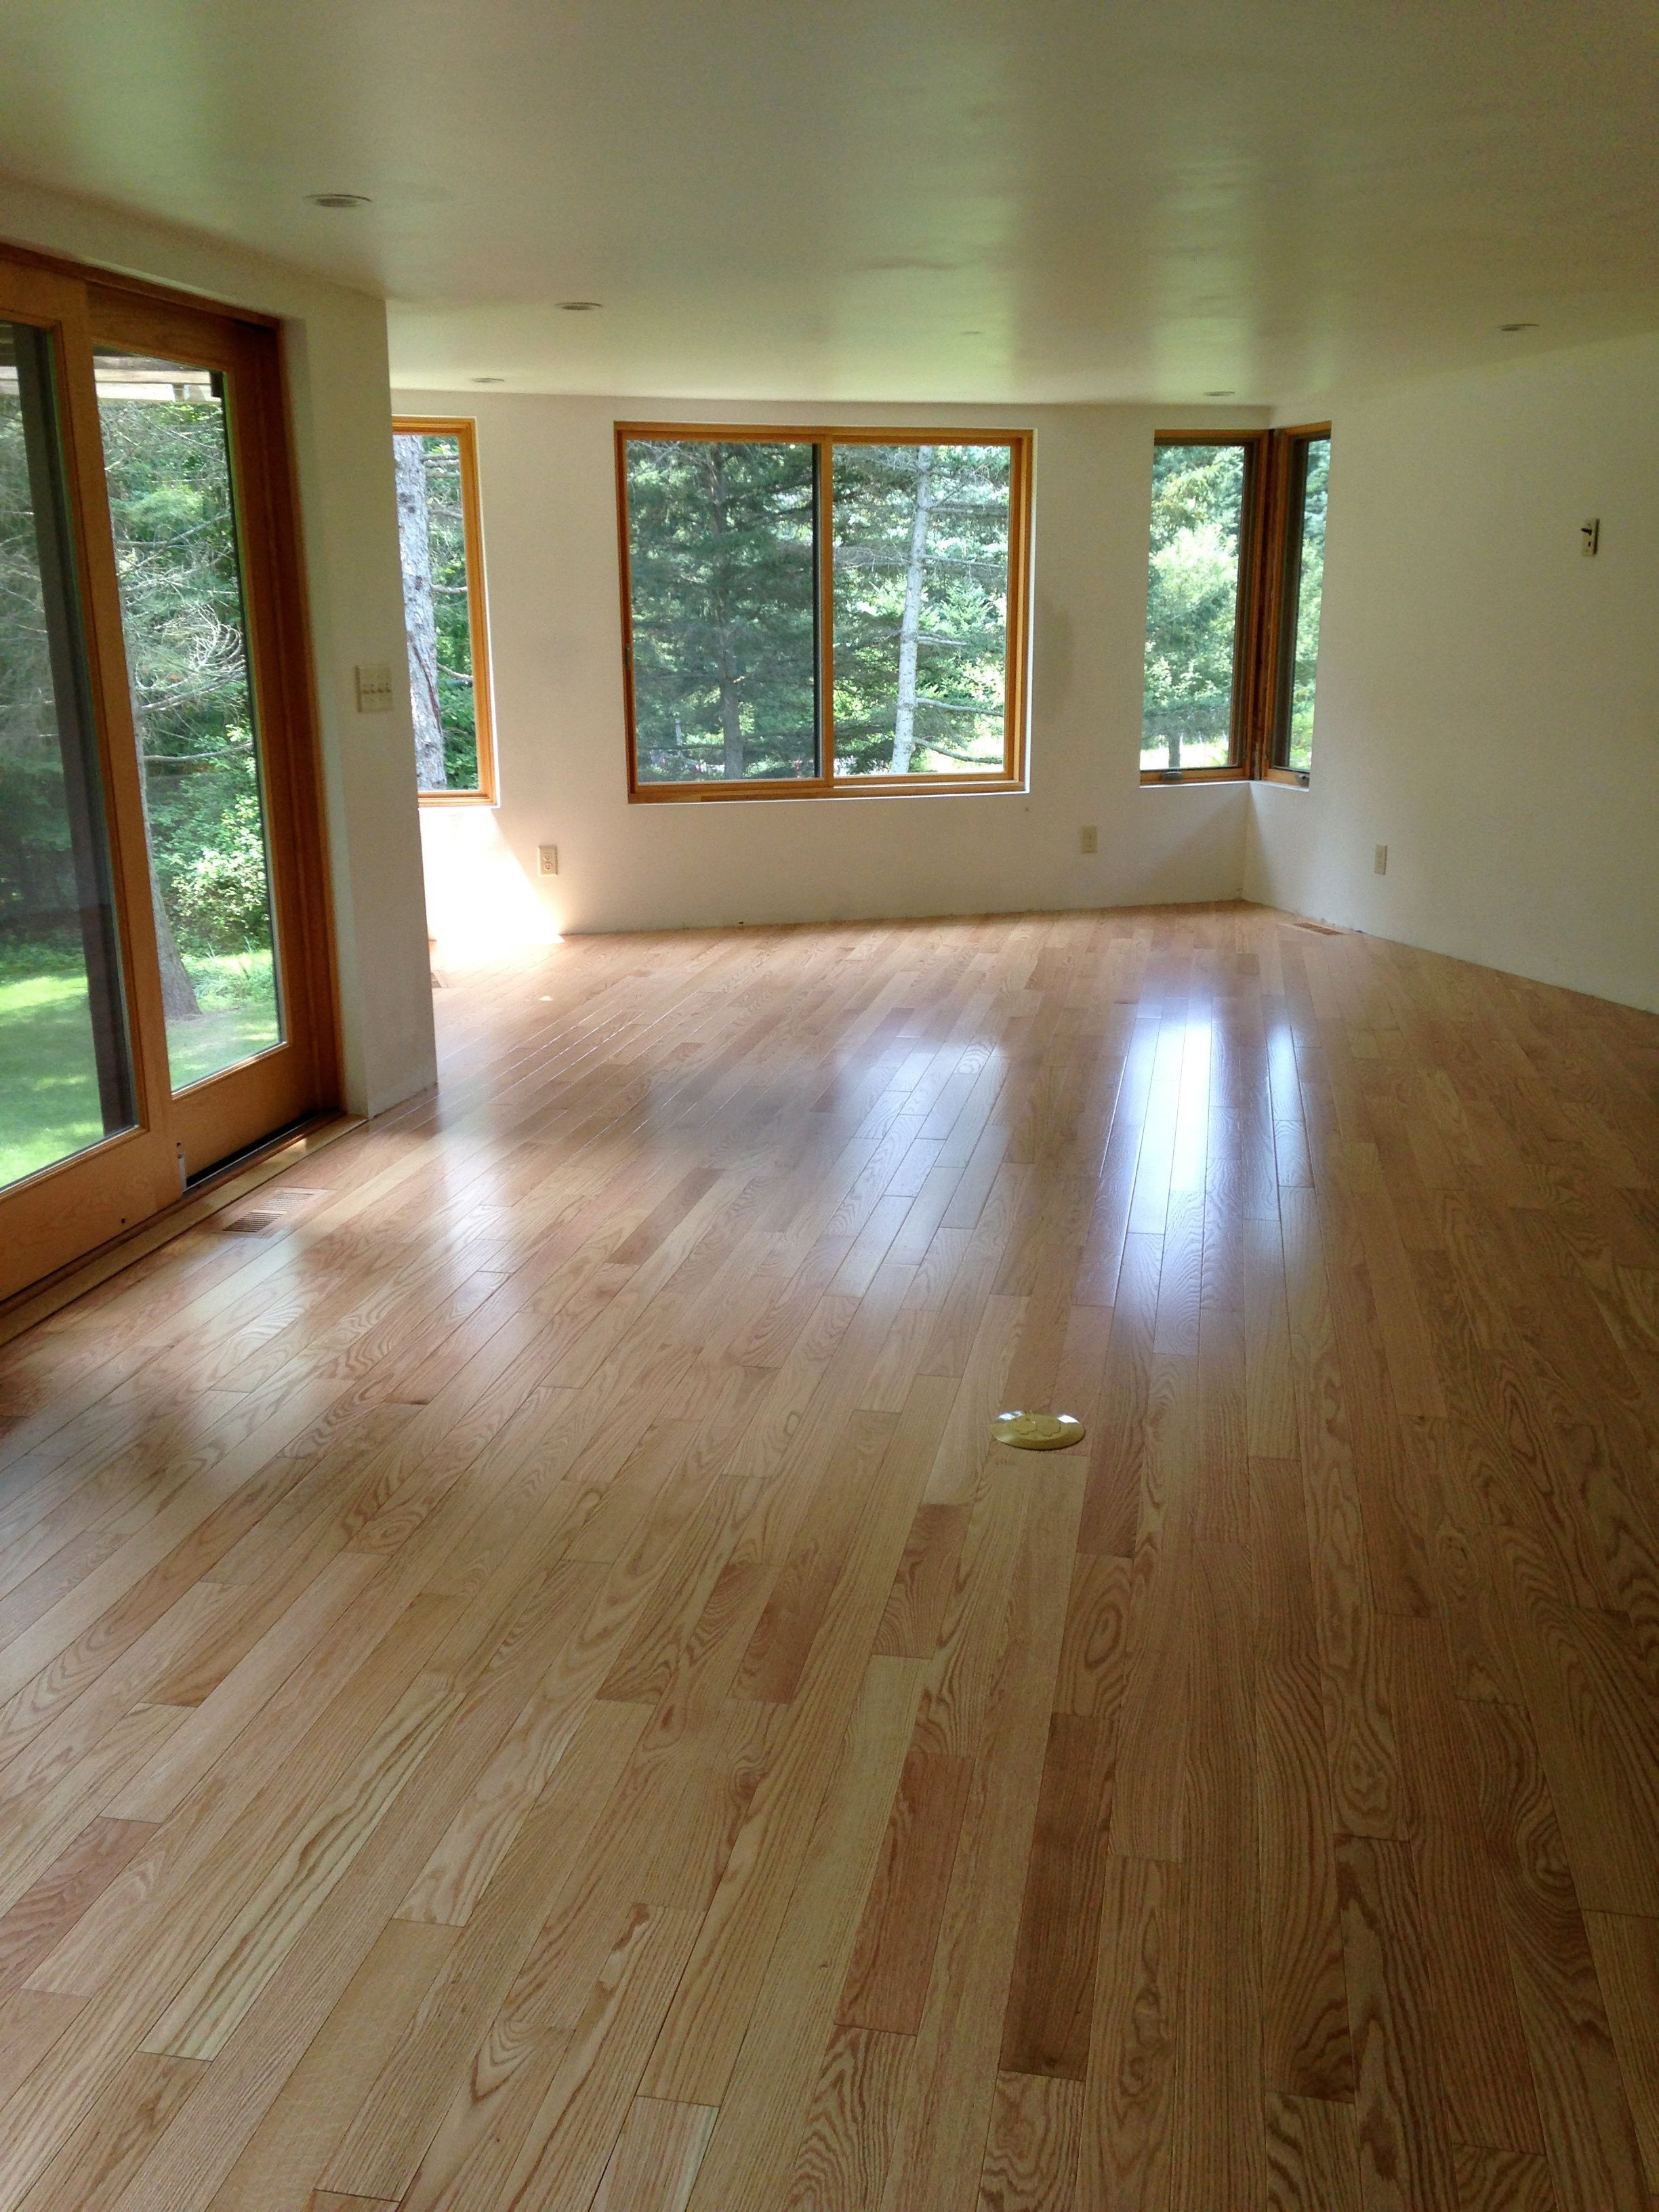 16 Stylish Sanding Hardwood Floors 2024 free download sanding hardwood floors of sanding hardwood floors great methods to use for refinishing throughout hardwood floor refinishing is an affordable way to spruce up your space without a full repl